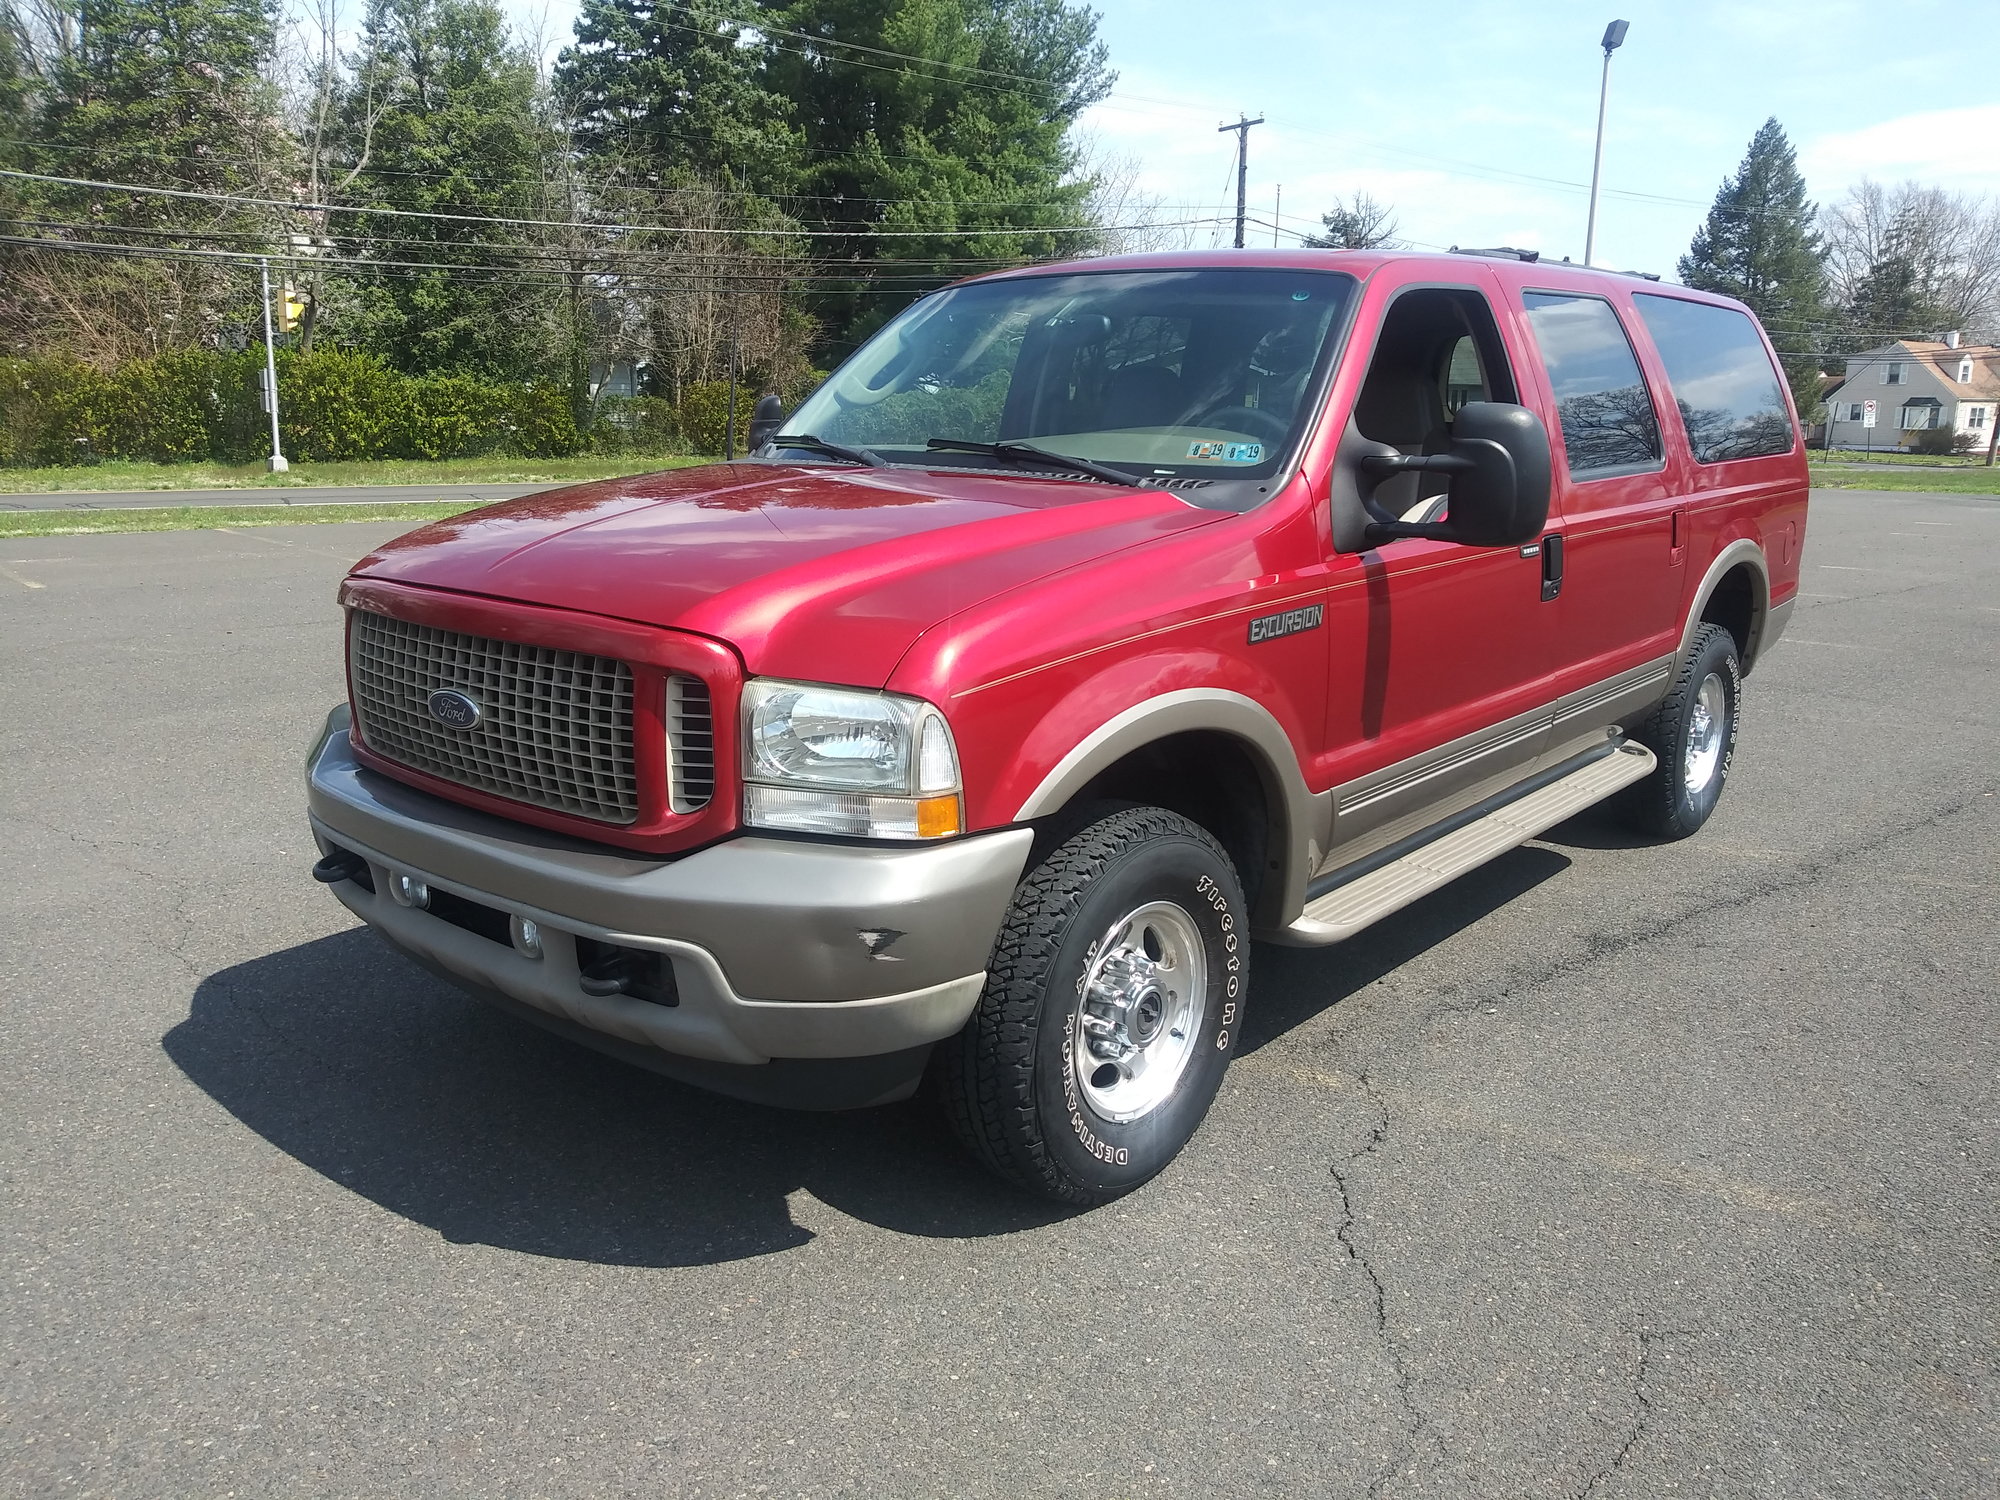 2003 Ford Excursion - 2003 Ford excursion 58k miles v10 4x4 - Used - VIN 1fmnu45s63ea35625 - 58,000 Miles - 10 cyl - 4WD - Automatic - SUV - Red - Croydon, PA 19021, United States